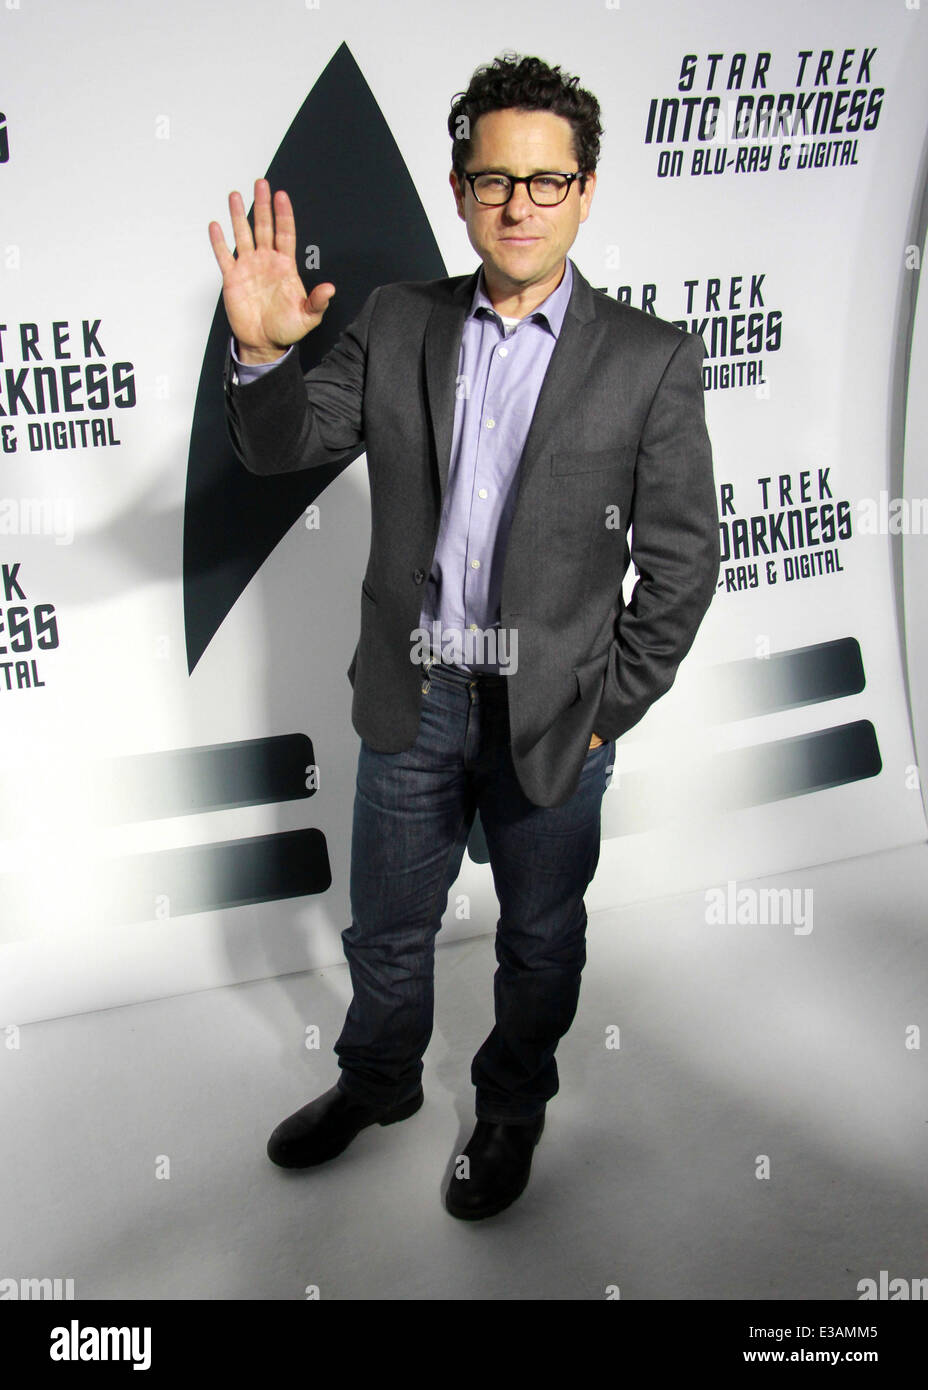 Paramount Pictures Celebrates The Blu-ray And DVD Debut Of 'Star Trek: Into Darkness' Held at California Science Center  Featuring: J.J. Abrams Where: Los Angeles, California, United States When: 11 Sep 2013 Stock Photo